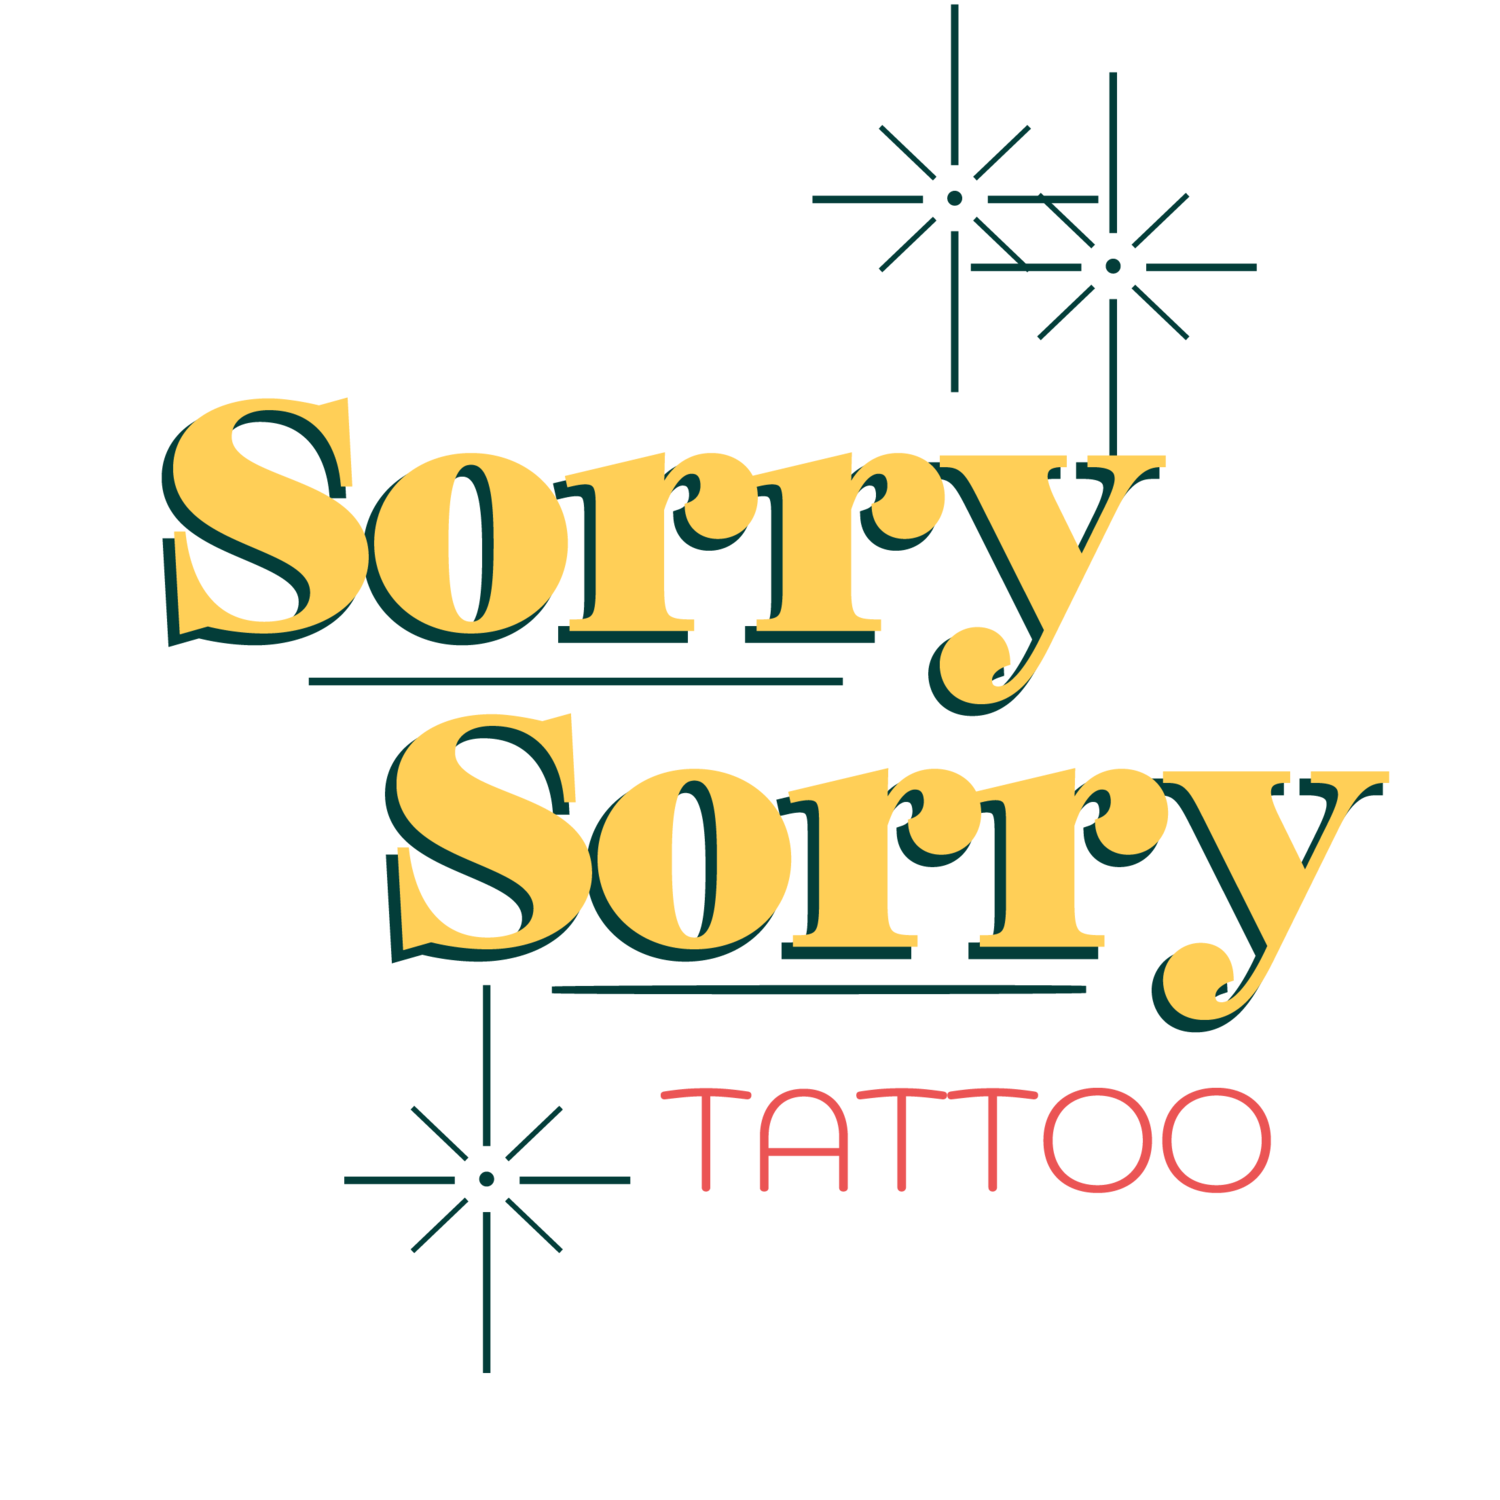 Sorry Sorry Store